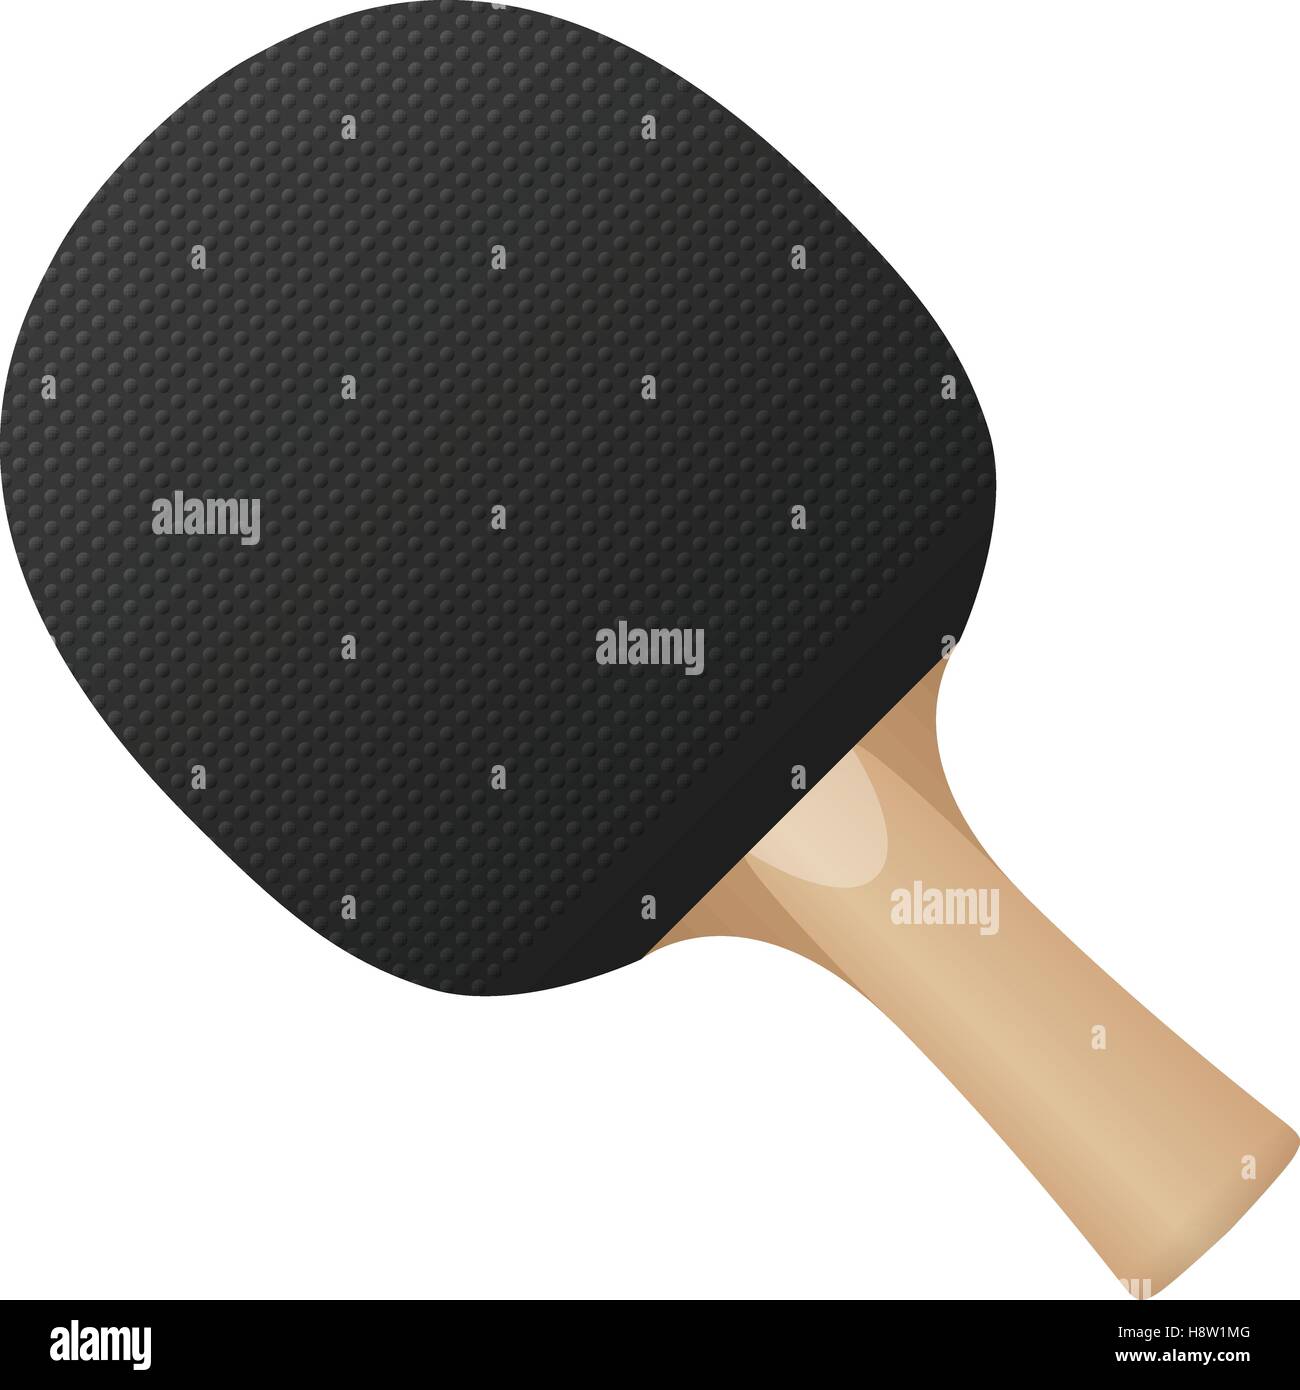 Table tennis bat on a white background. Stock Vector